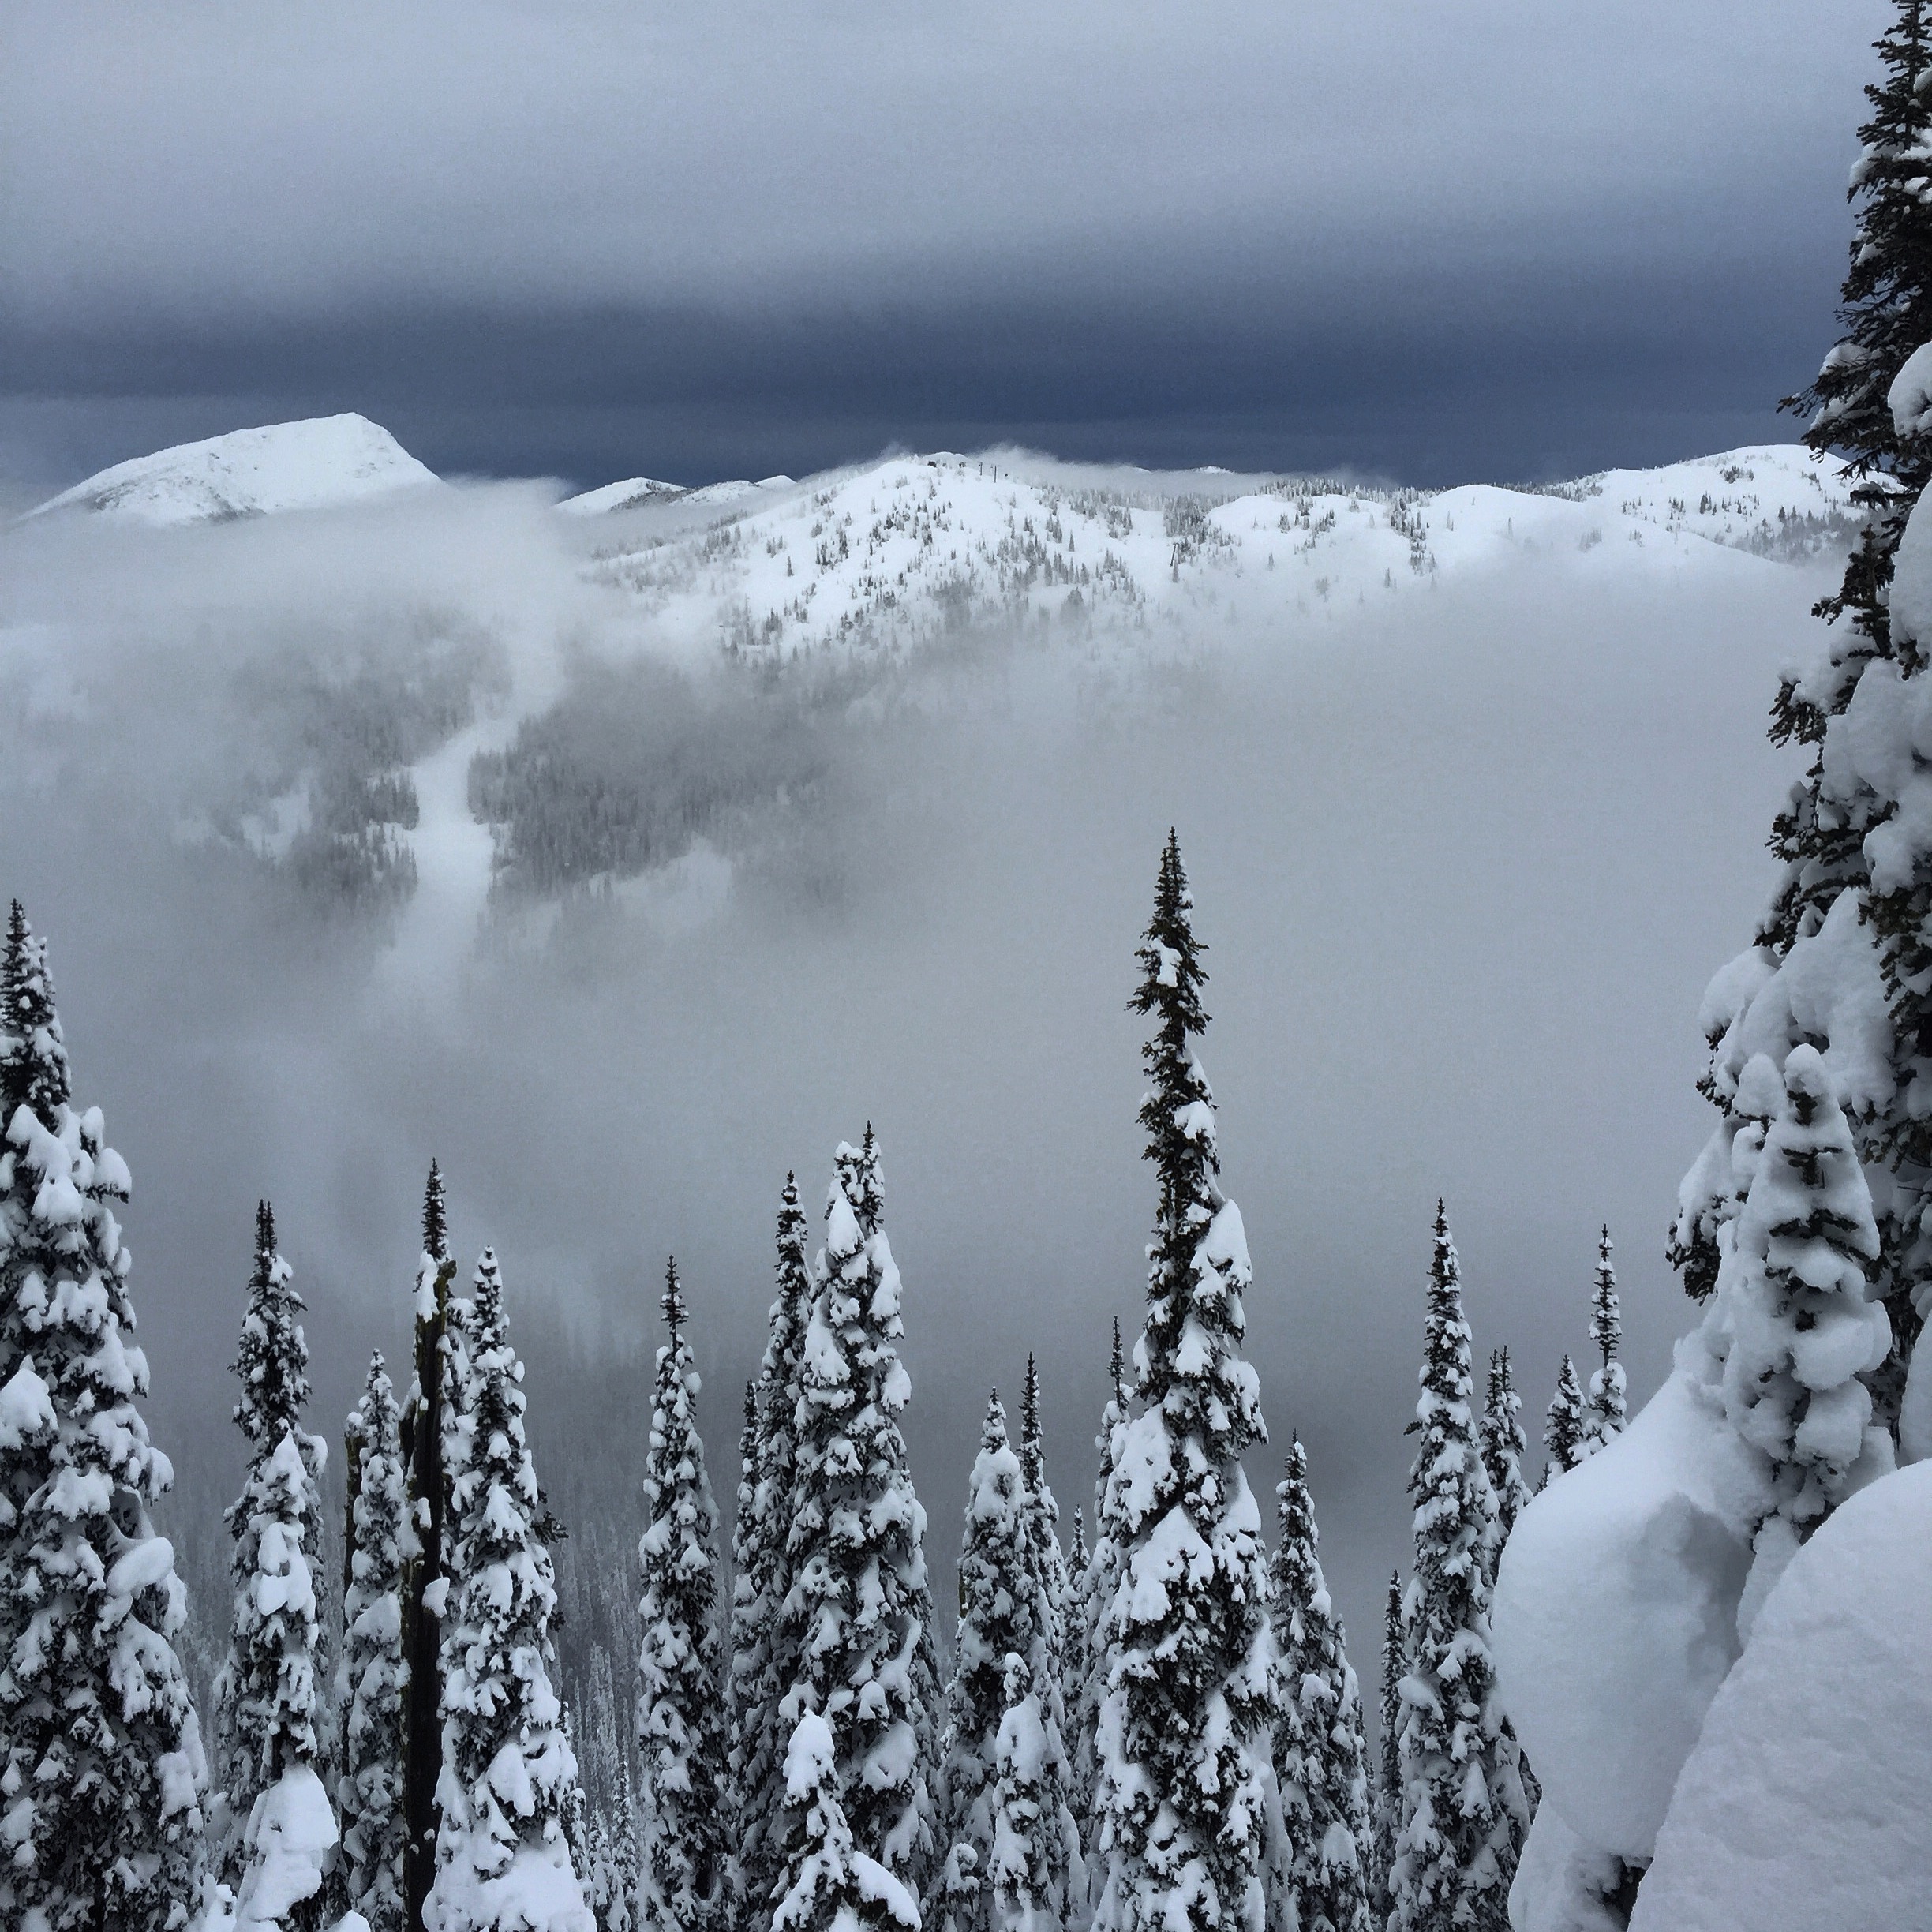 Looking across at Grey Mountain from Granite Mountain as the clouds cleared.